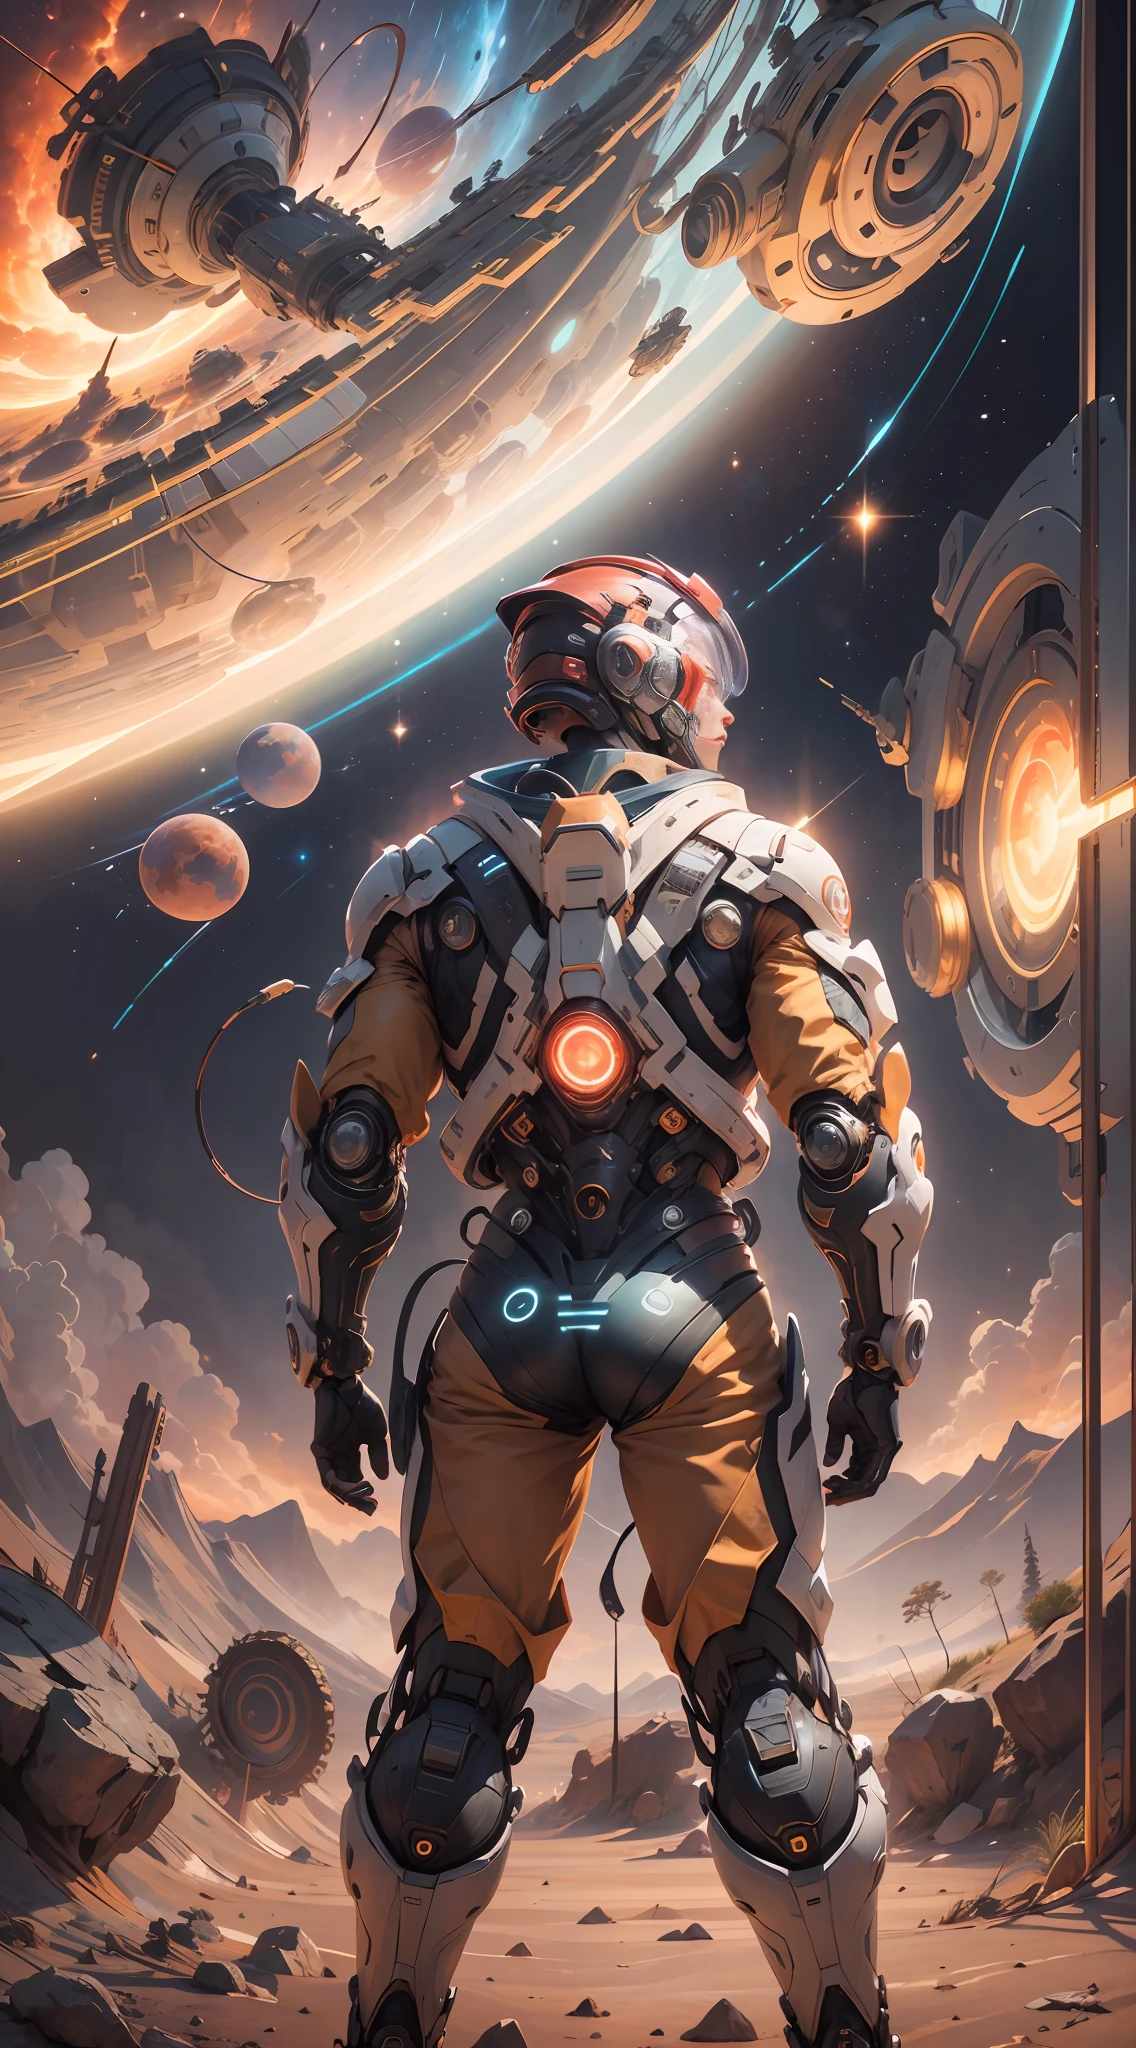 ((Masterpiece)), (Best Quality)), 8K, high detail, hyper-detail, the painting depicts a scene of breathtaking magnificent spatial images. The picture shows a man wearing a mecha, facing back, looking at a red glowing planet in space. The scenes are extremely detailed and the clarity is extraordinary, capturing every intricate detail of the panorama.